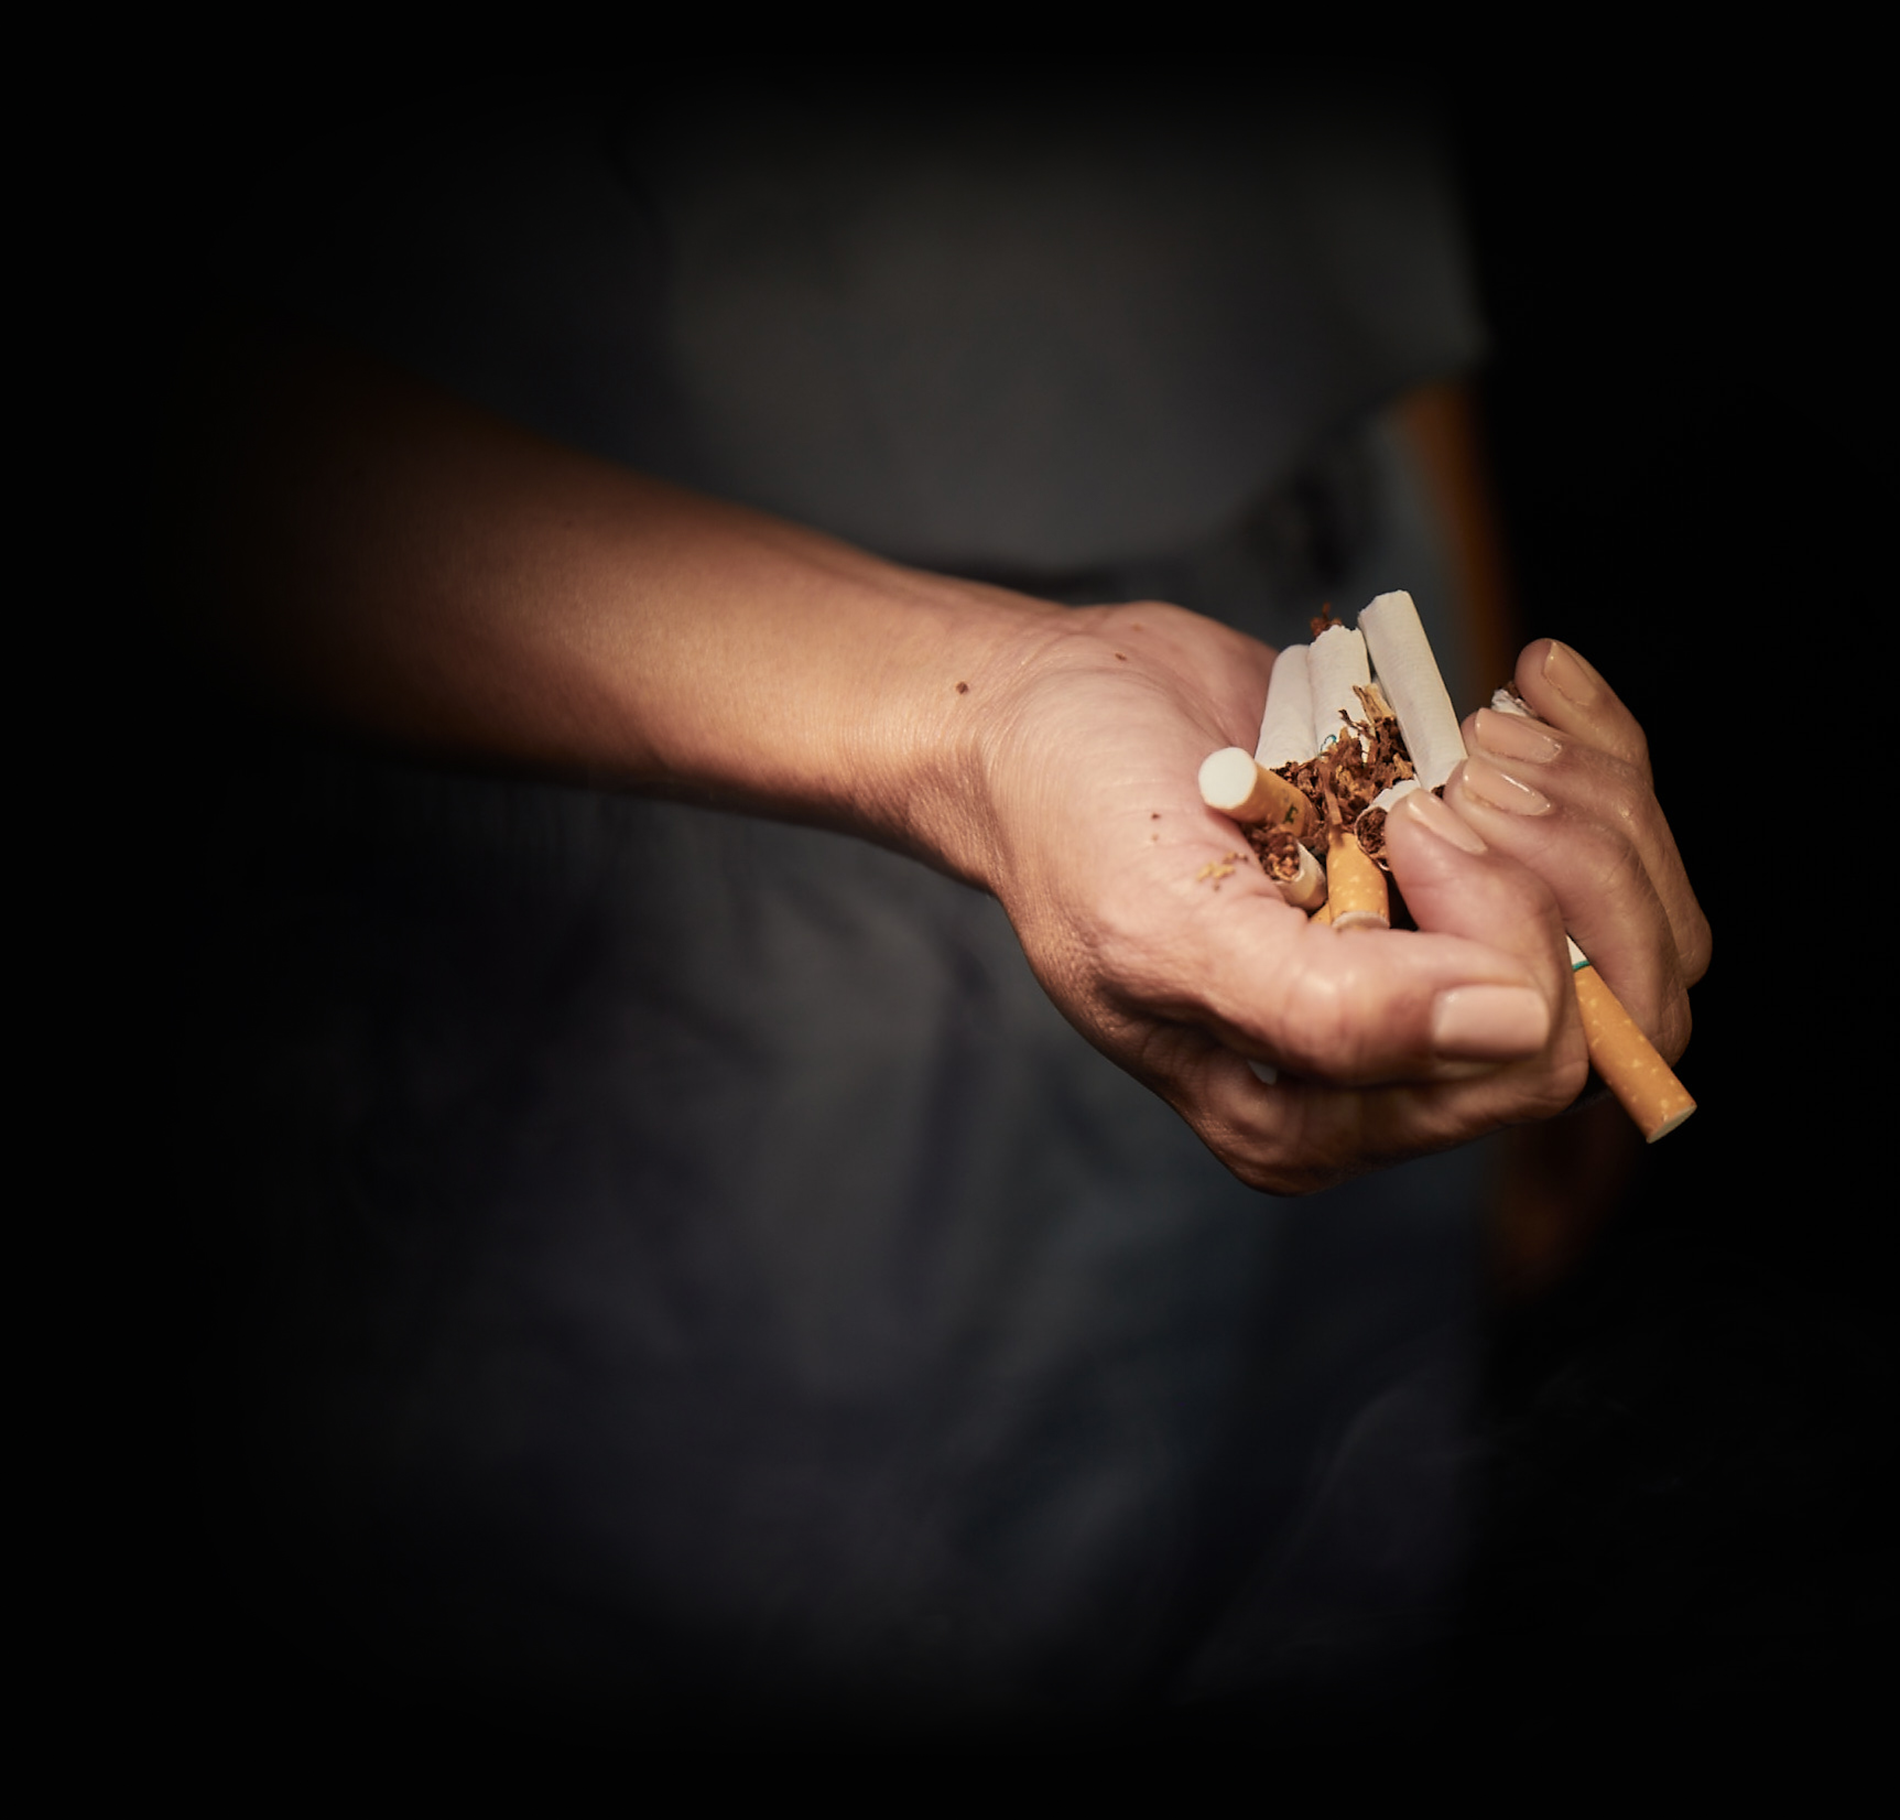 A partially closed hand full of 6 crumbled cigarettes